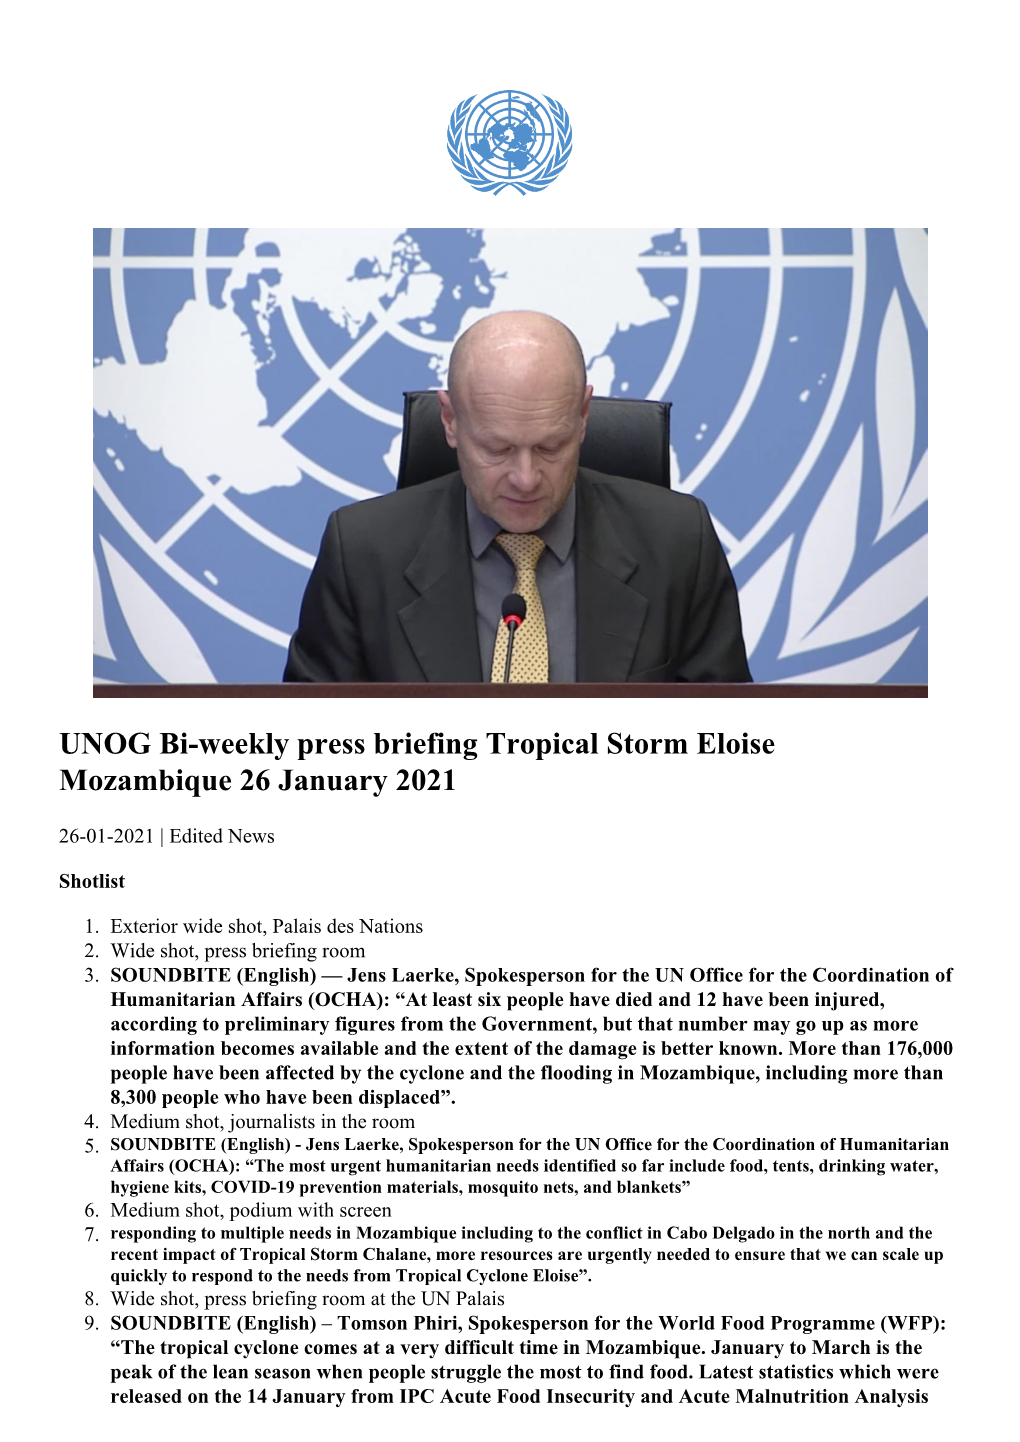 UNOG Bi-Weekly Press Briefing Tropical Storm Eloise Mozambique 26 January 2021